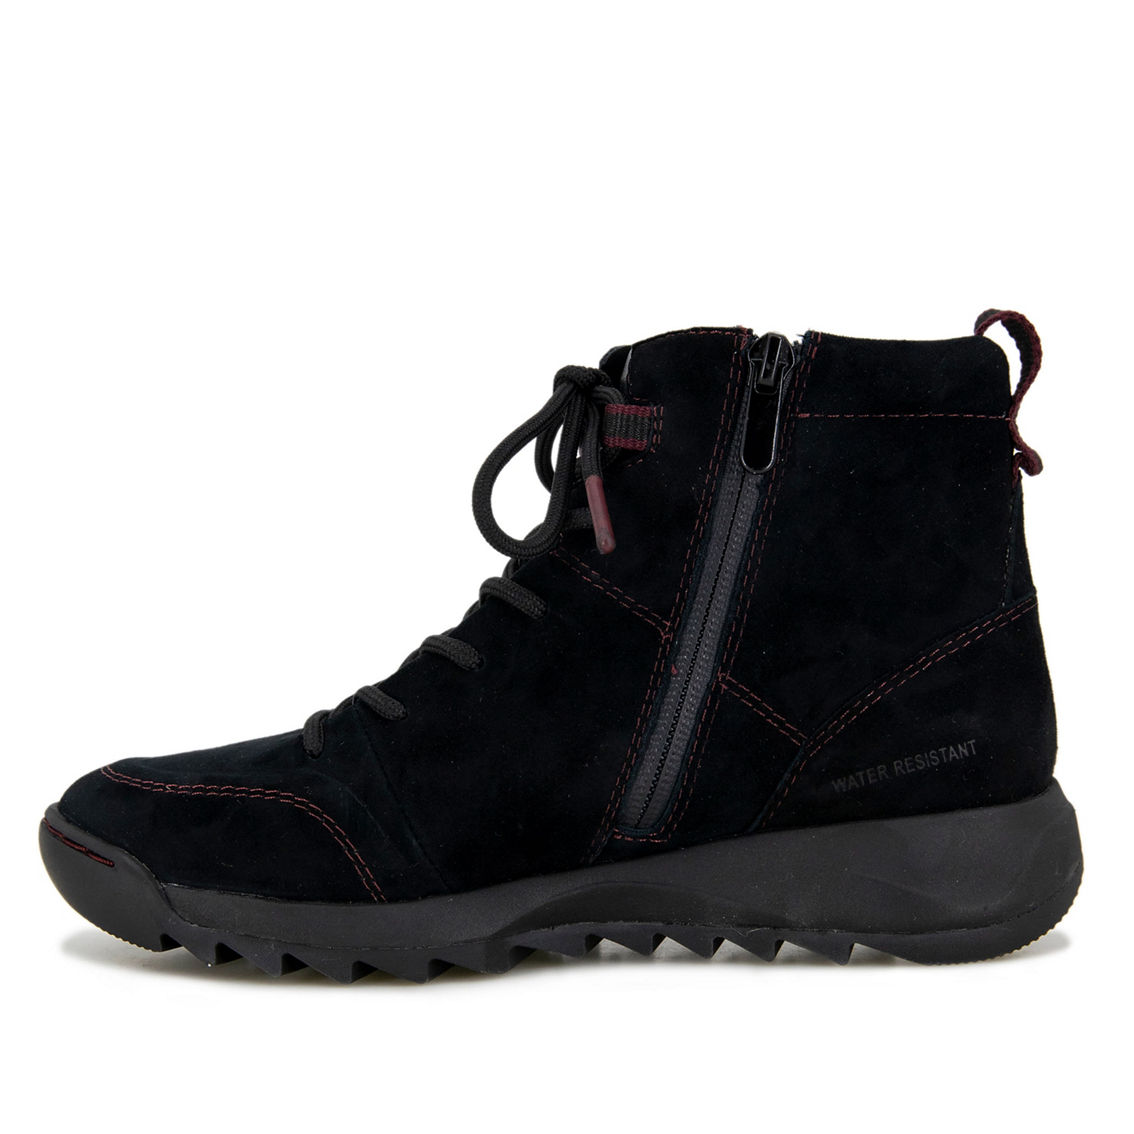 Jambu Aria Water Resistant Ankle Boot - Image 4 of 5